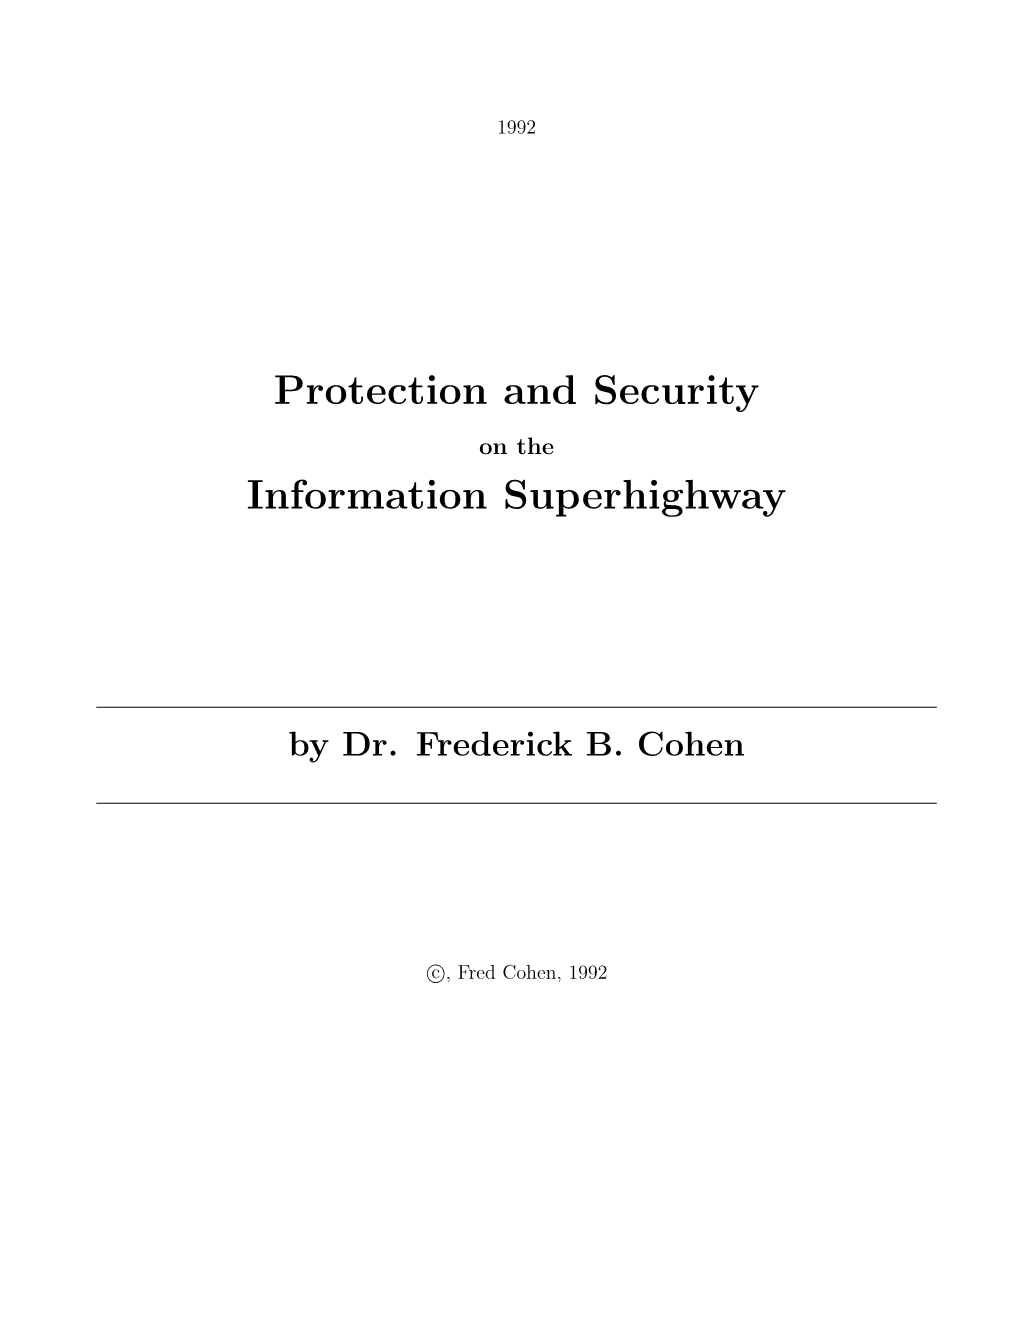 Protection and Security Information Superhighway